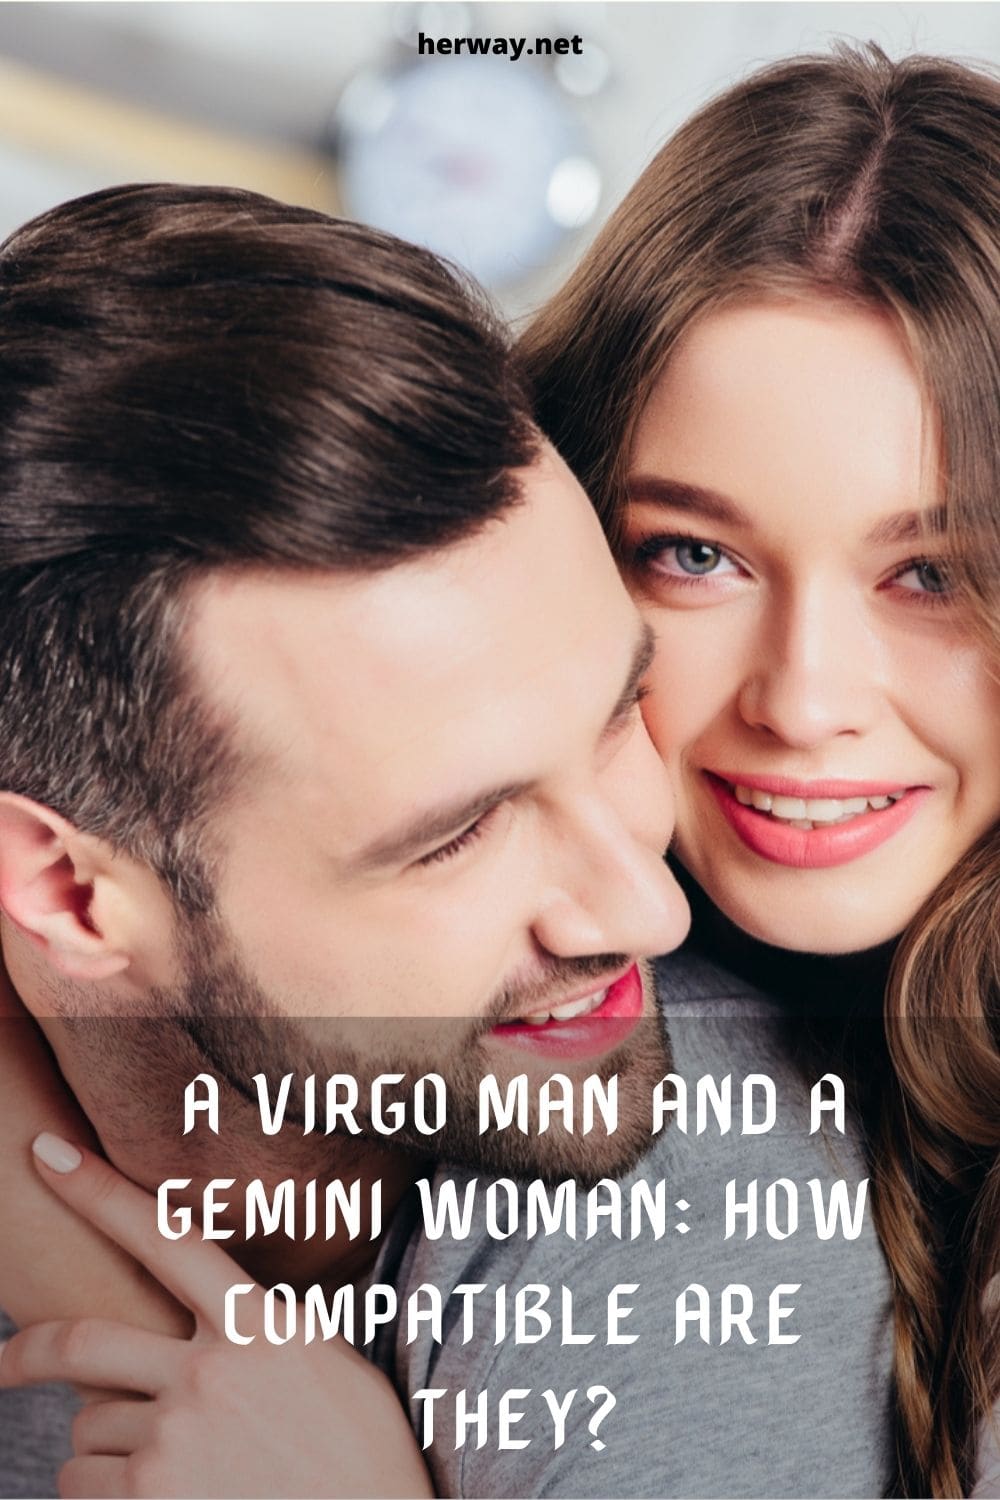 A Virgo Man And A Gemini Woman How Compatible Are They?